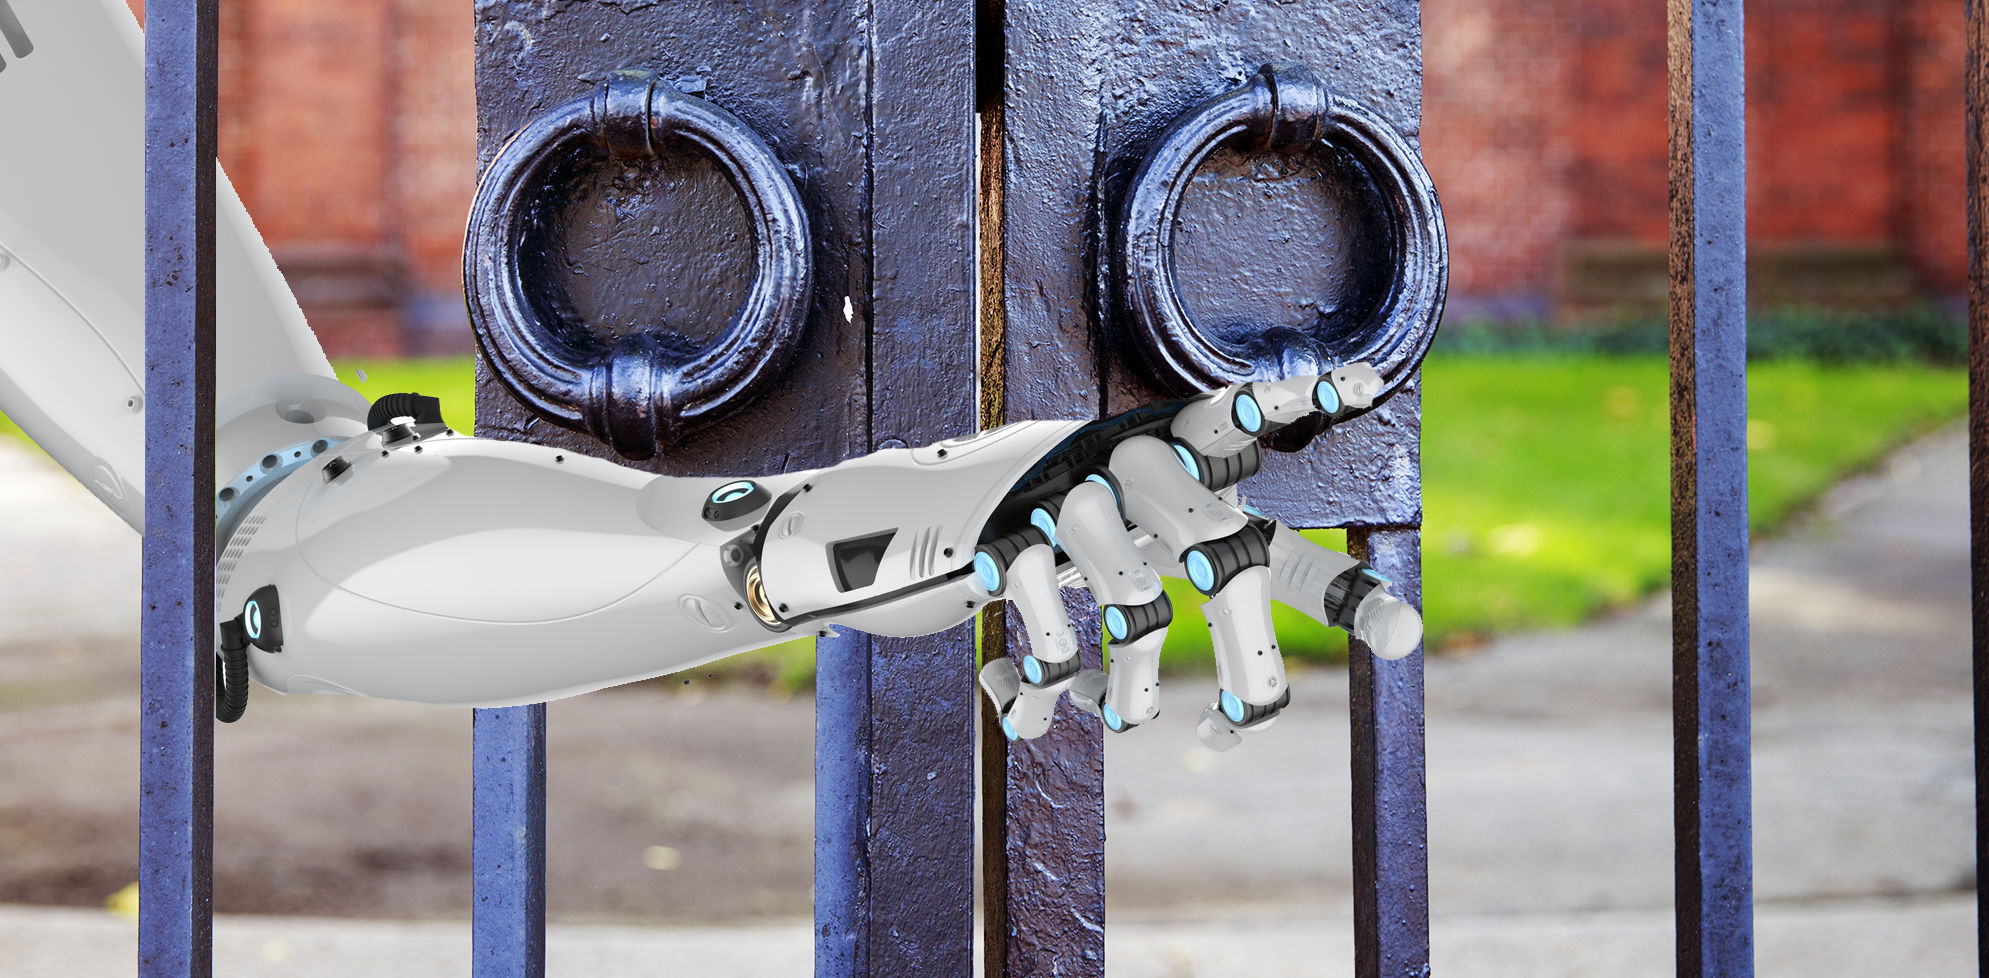 A robot opening the school gates